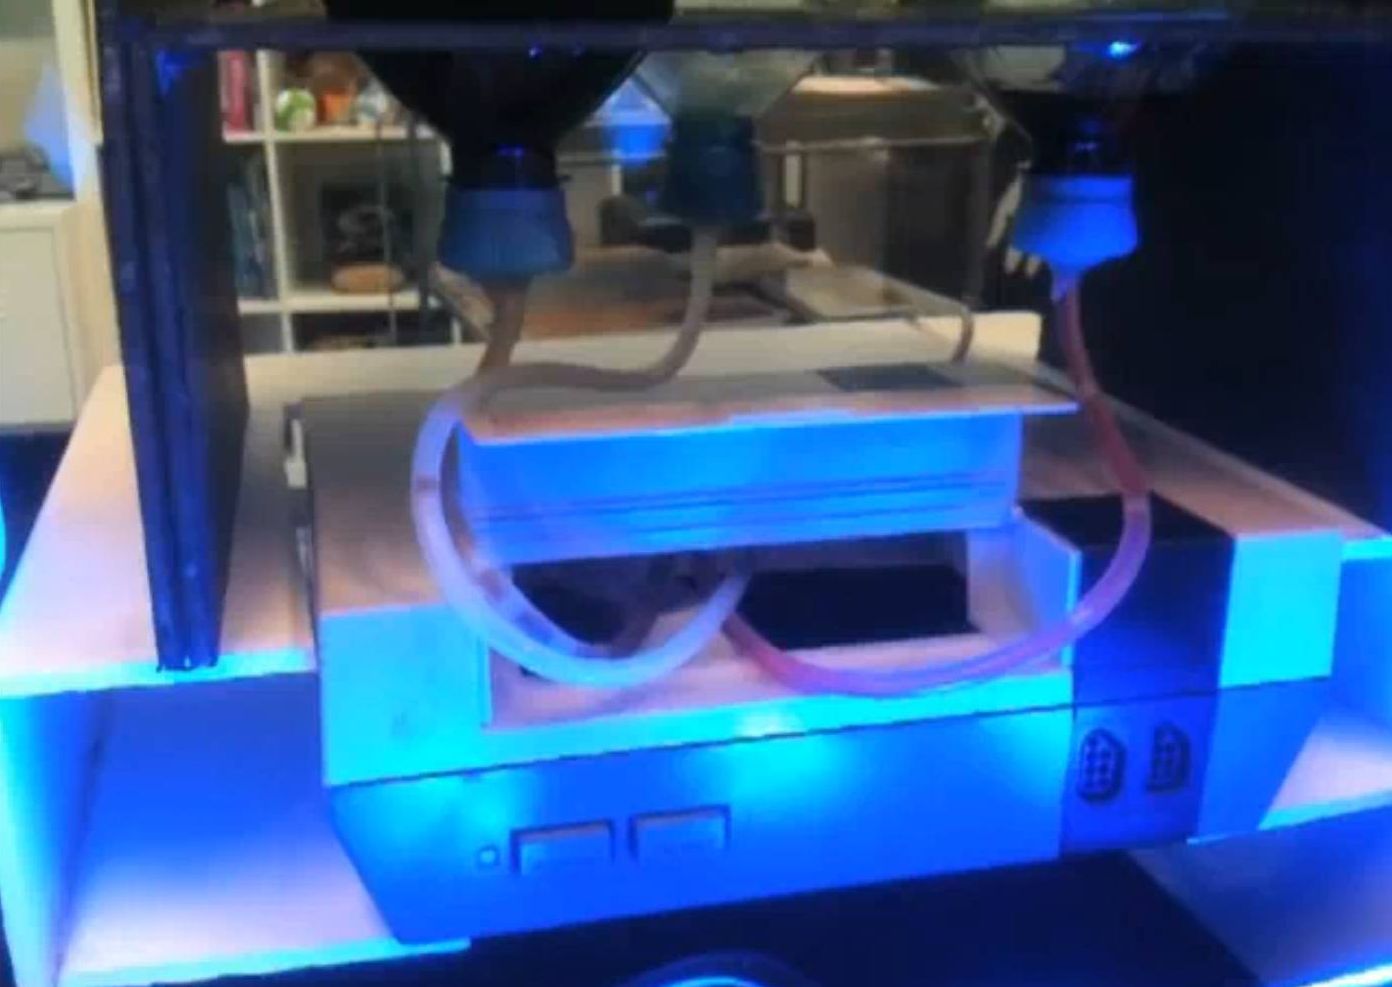 Robot Bartender Pours Your Drink Based on Your Tetris Skill